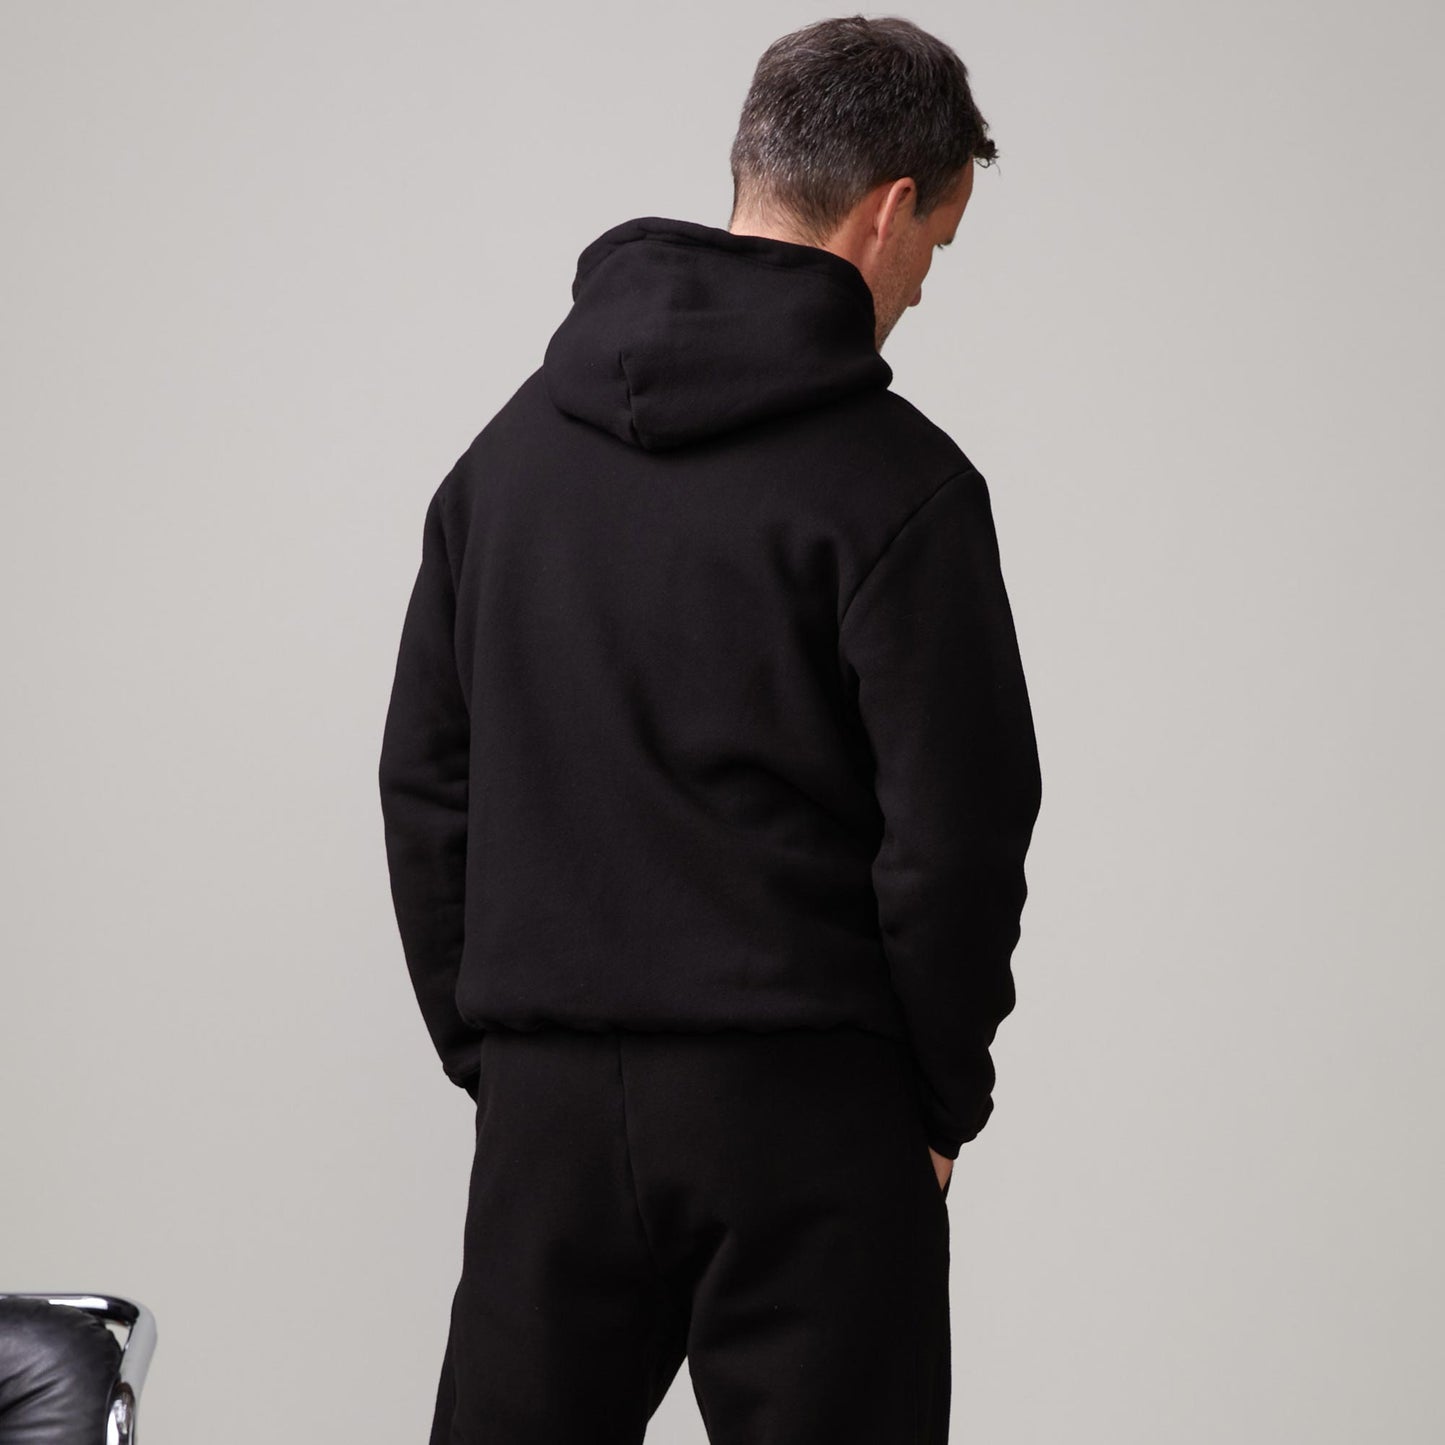 Back view of model wearing the oversized hoody in black.